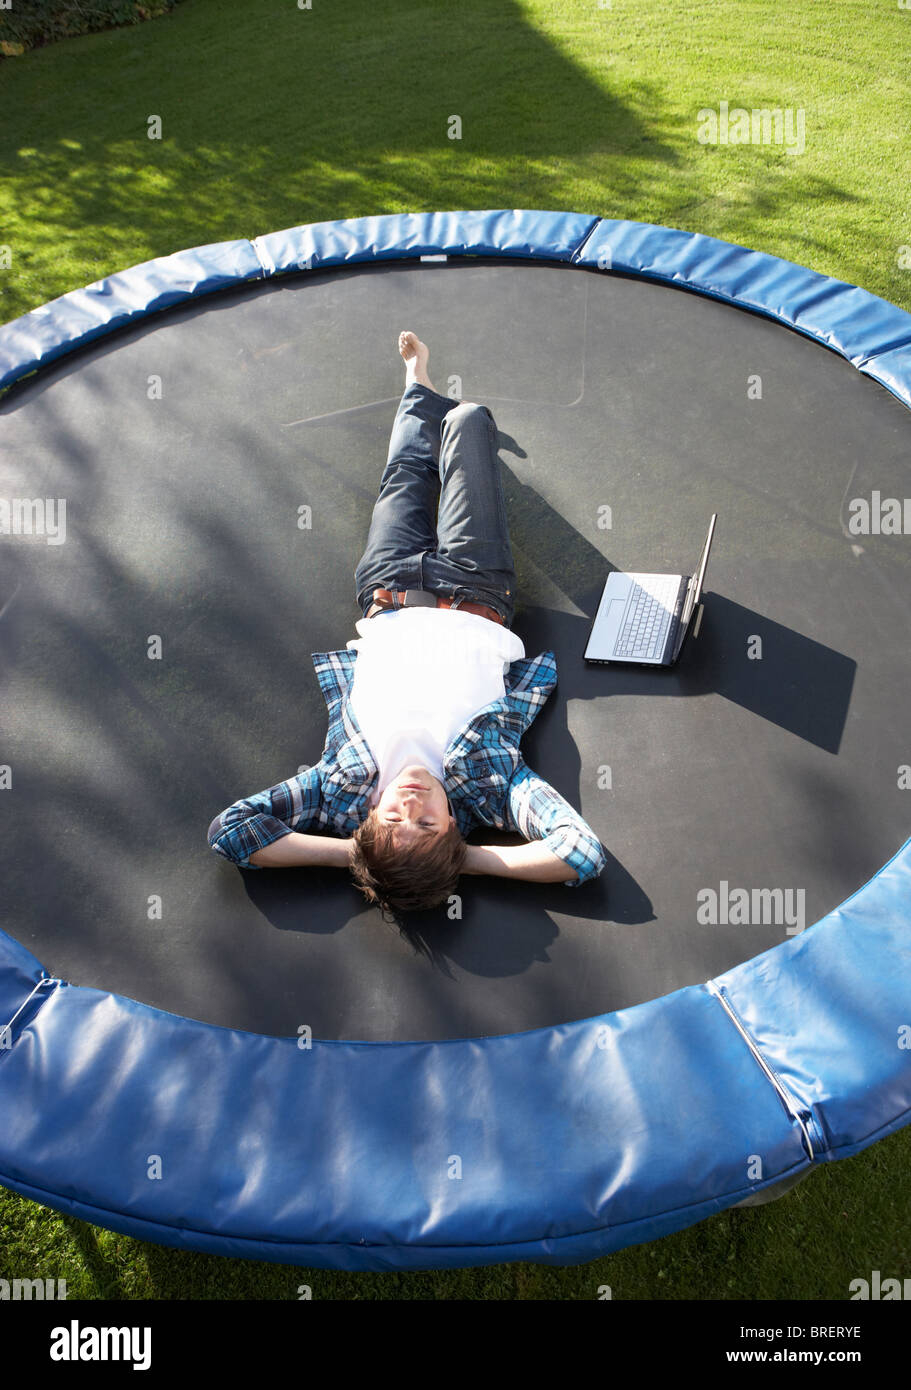 Young Man Relaxing On Trampoline With Laptop Stock Photo - Alamy